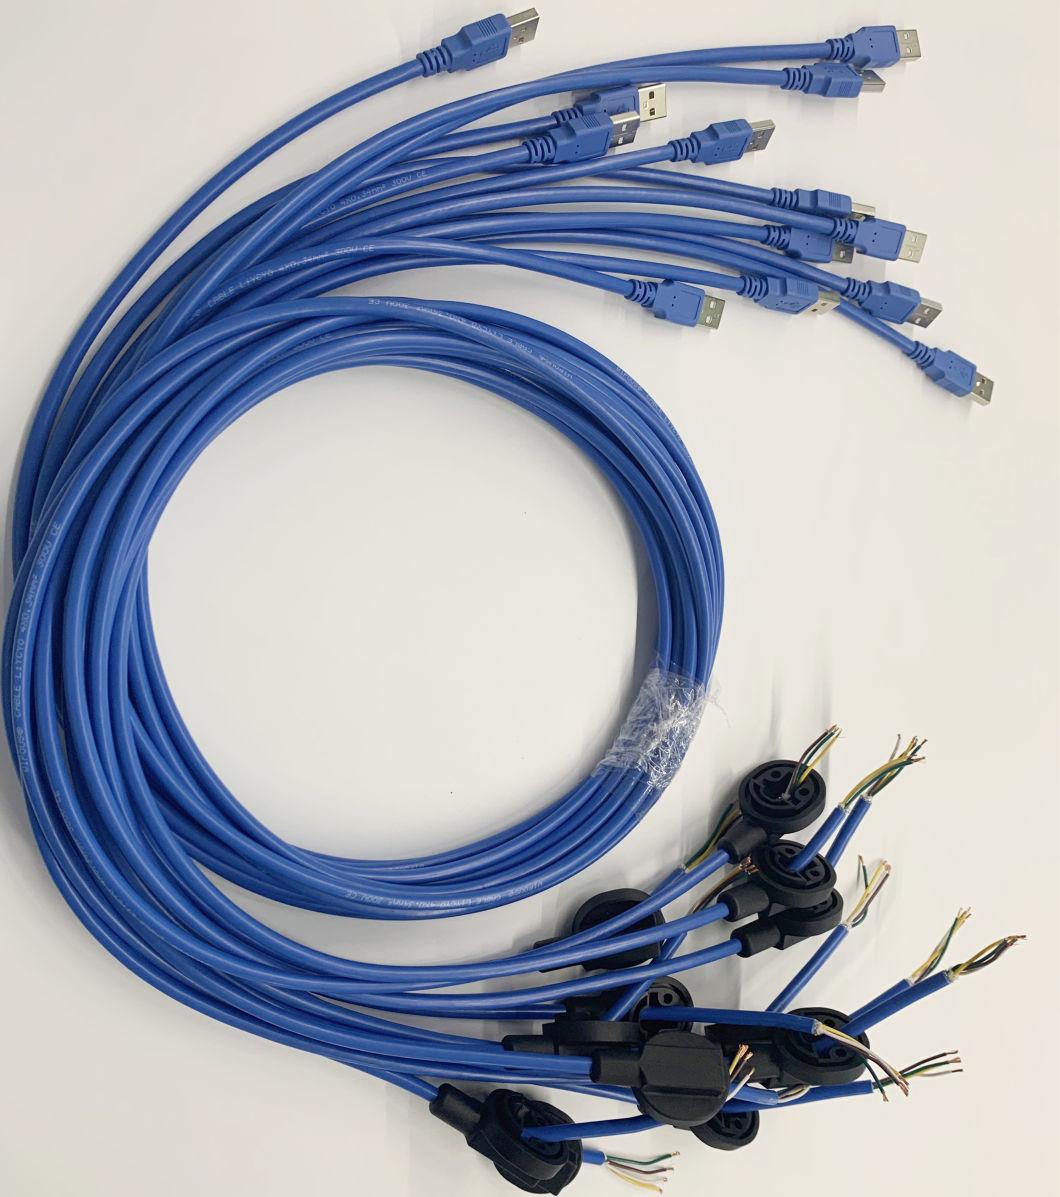 Low Price Electronic Wiring Harness USB to Open Cable for Home Appliance/Auto Parts/Medical Equipment